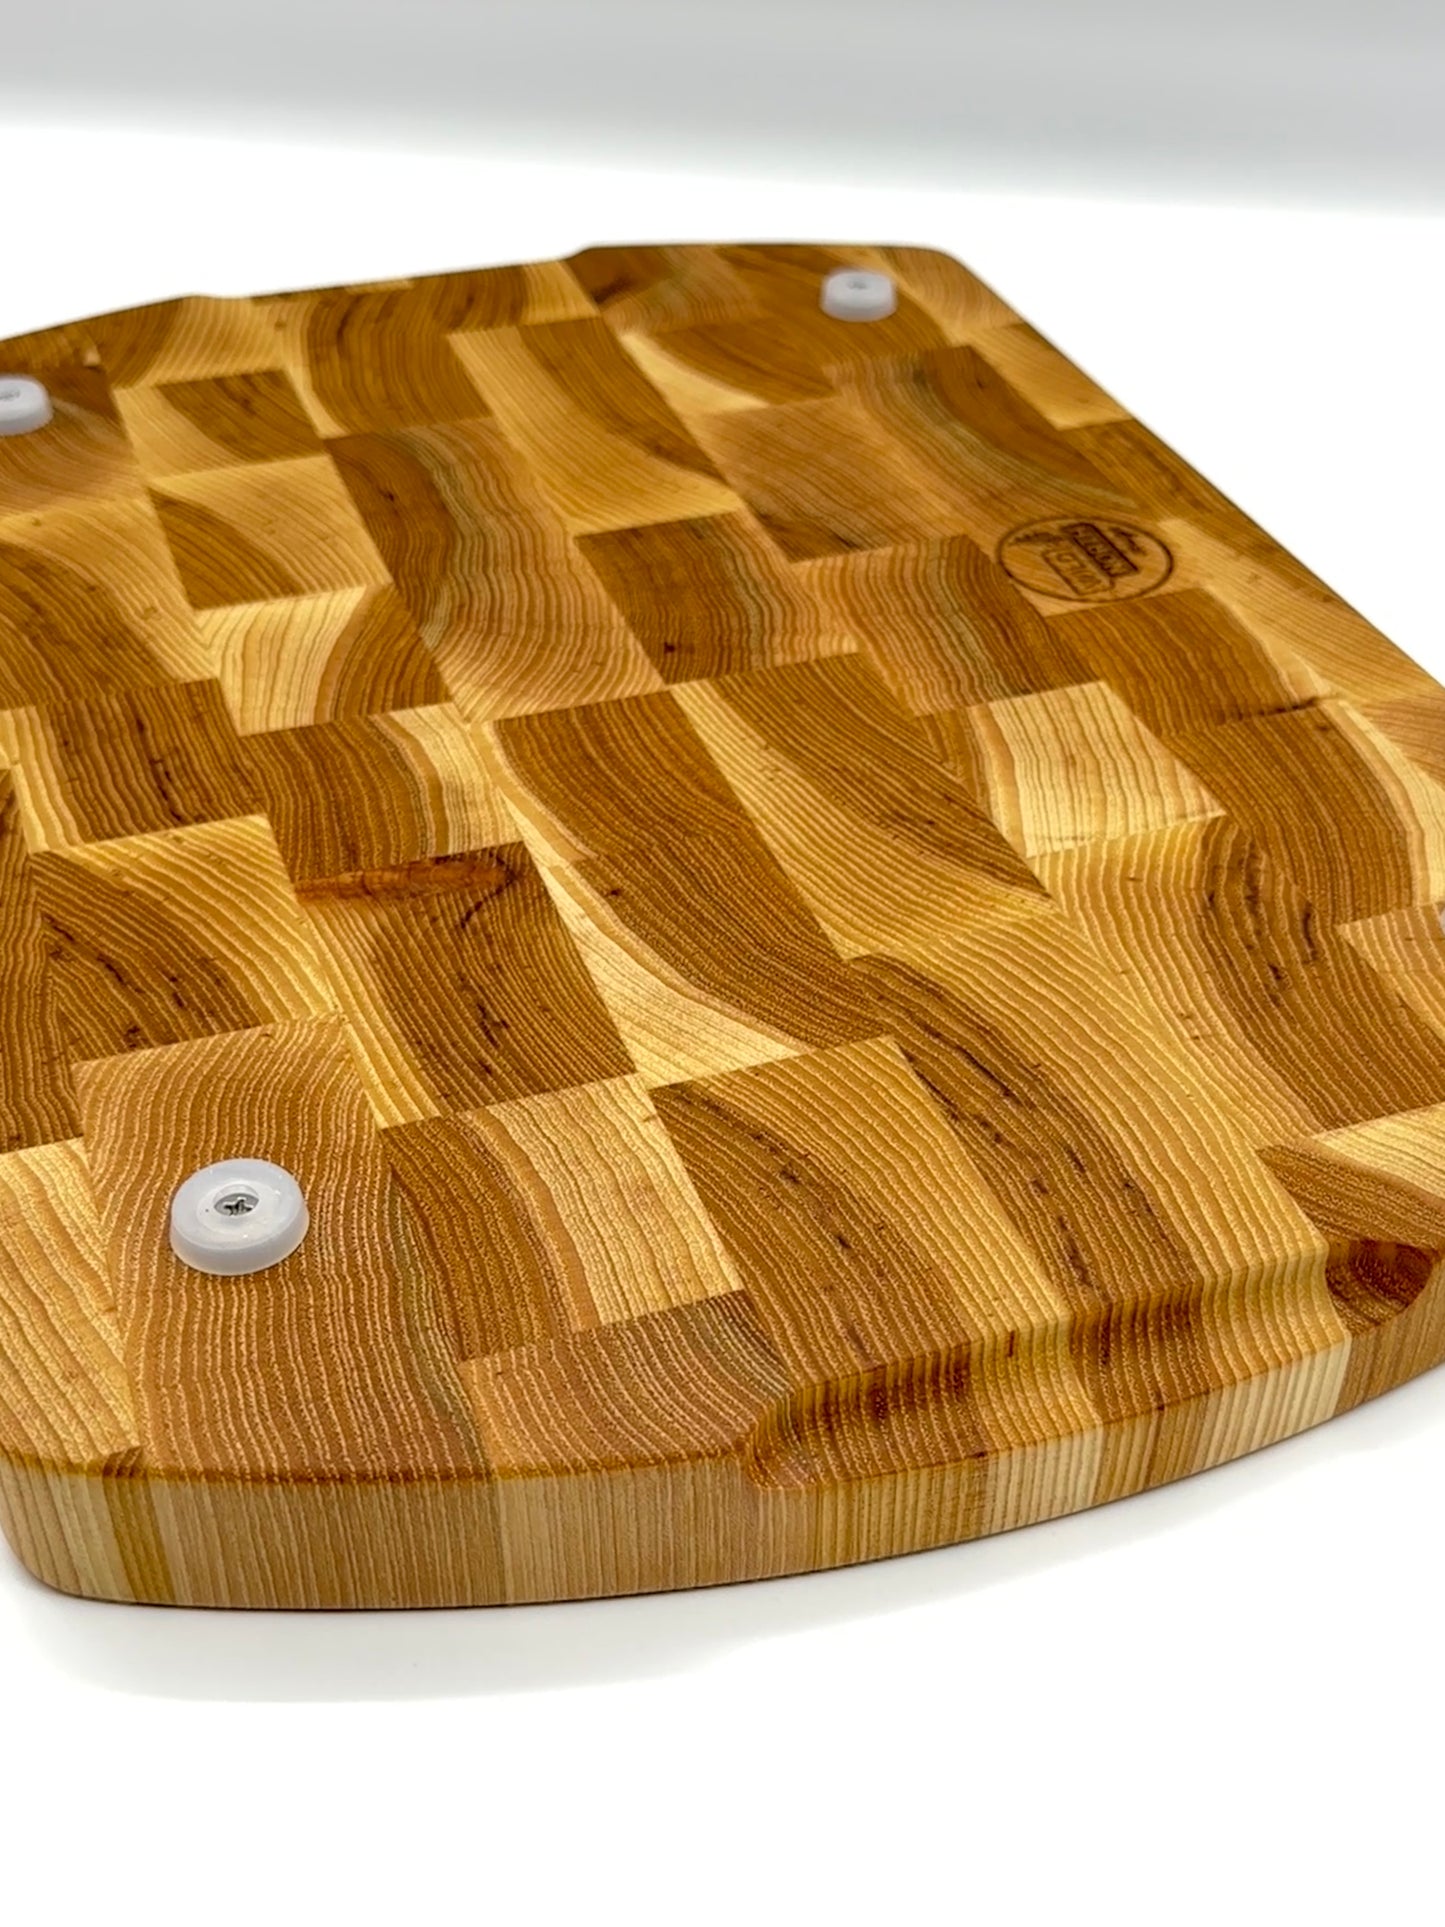 End Grain Hickory Cutting Board